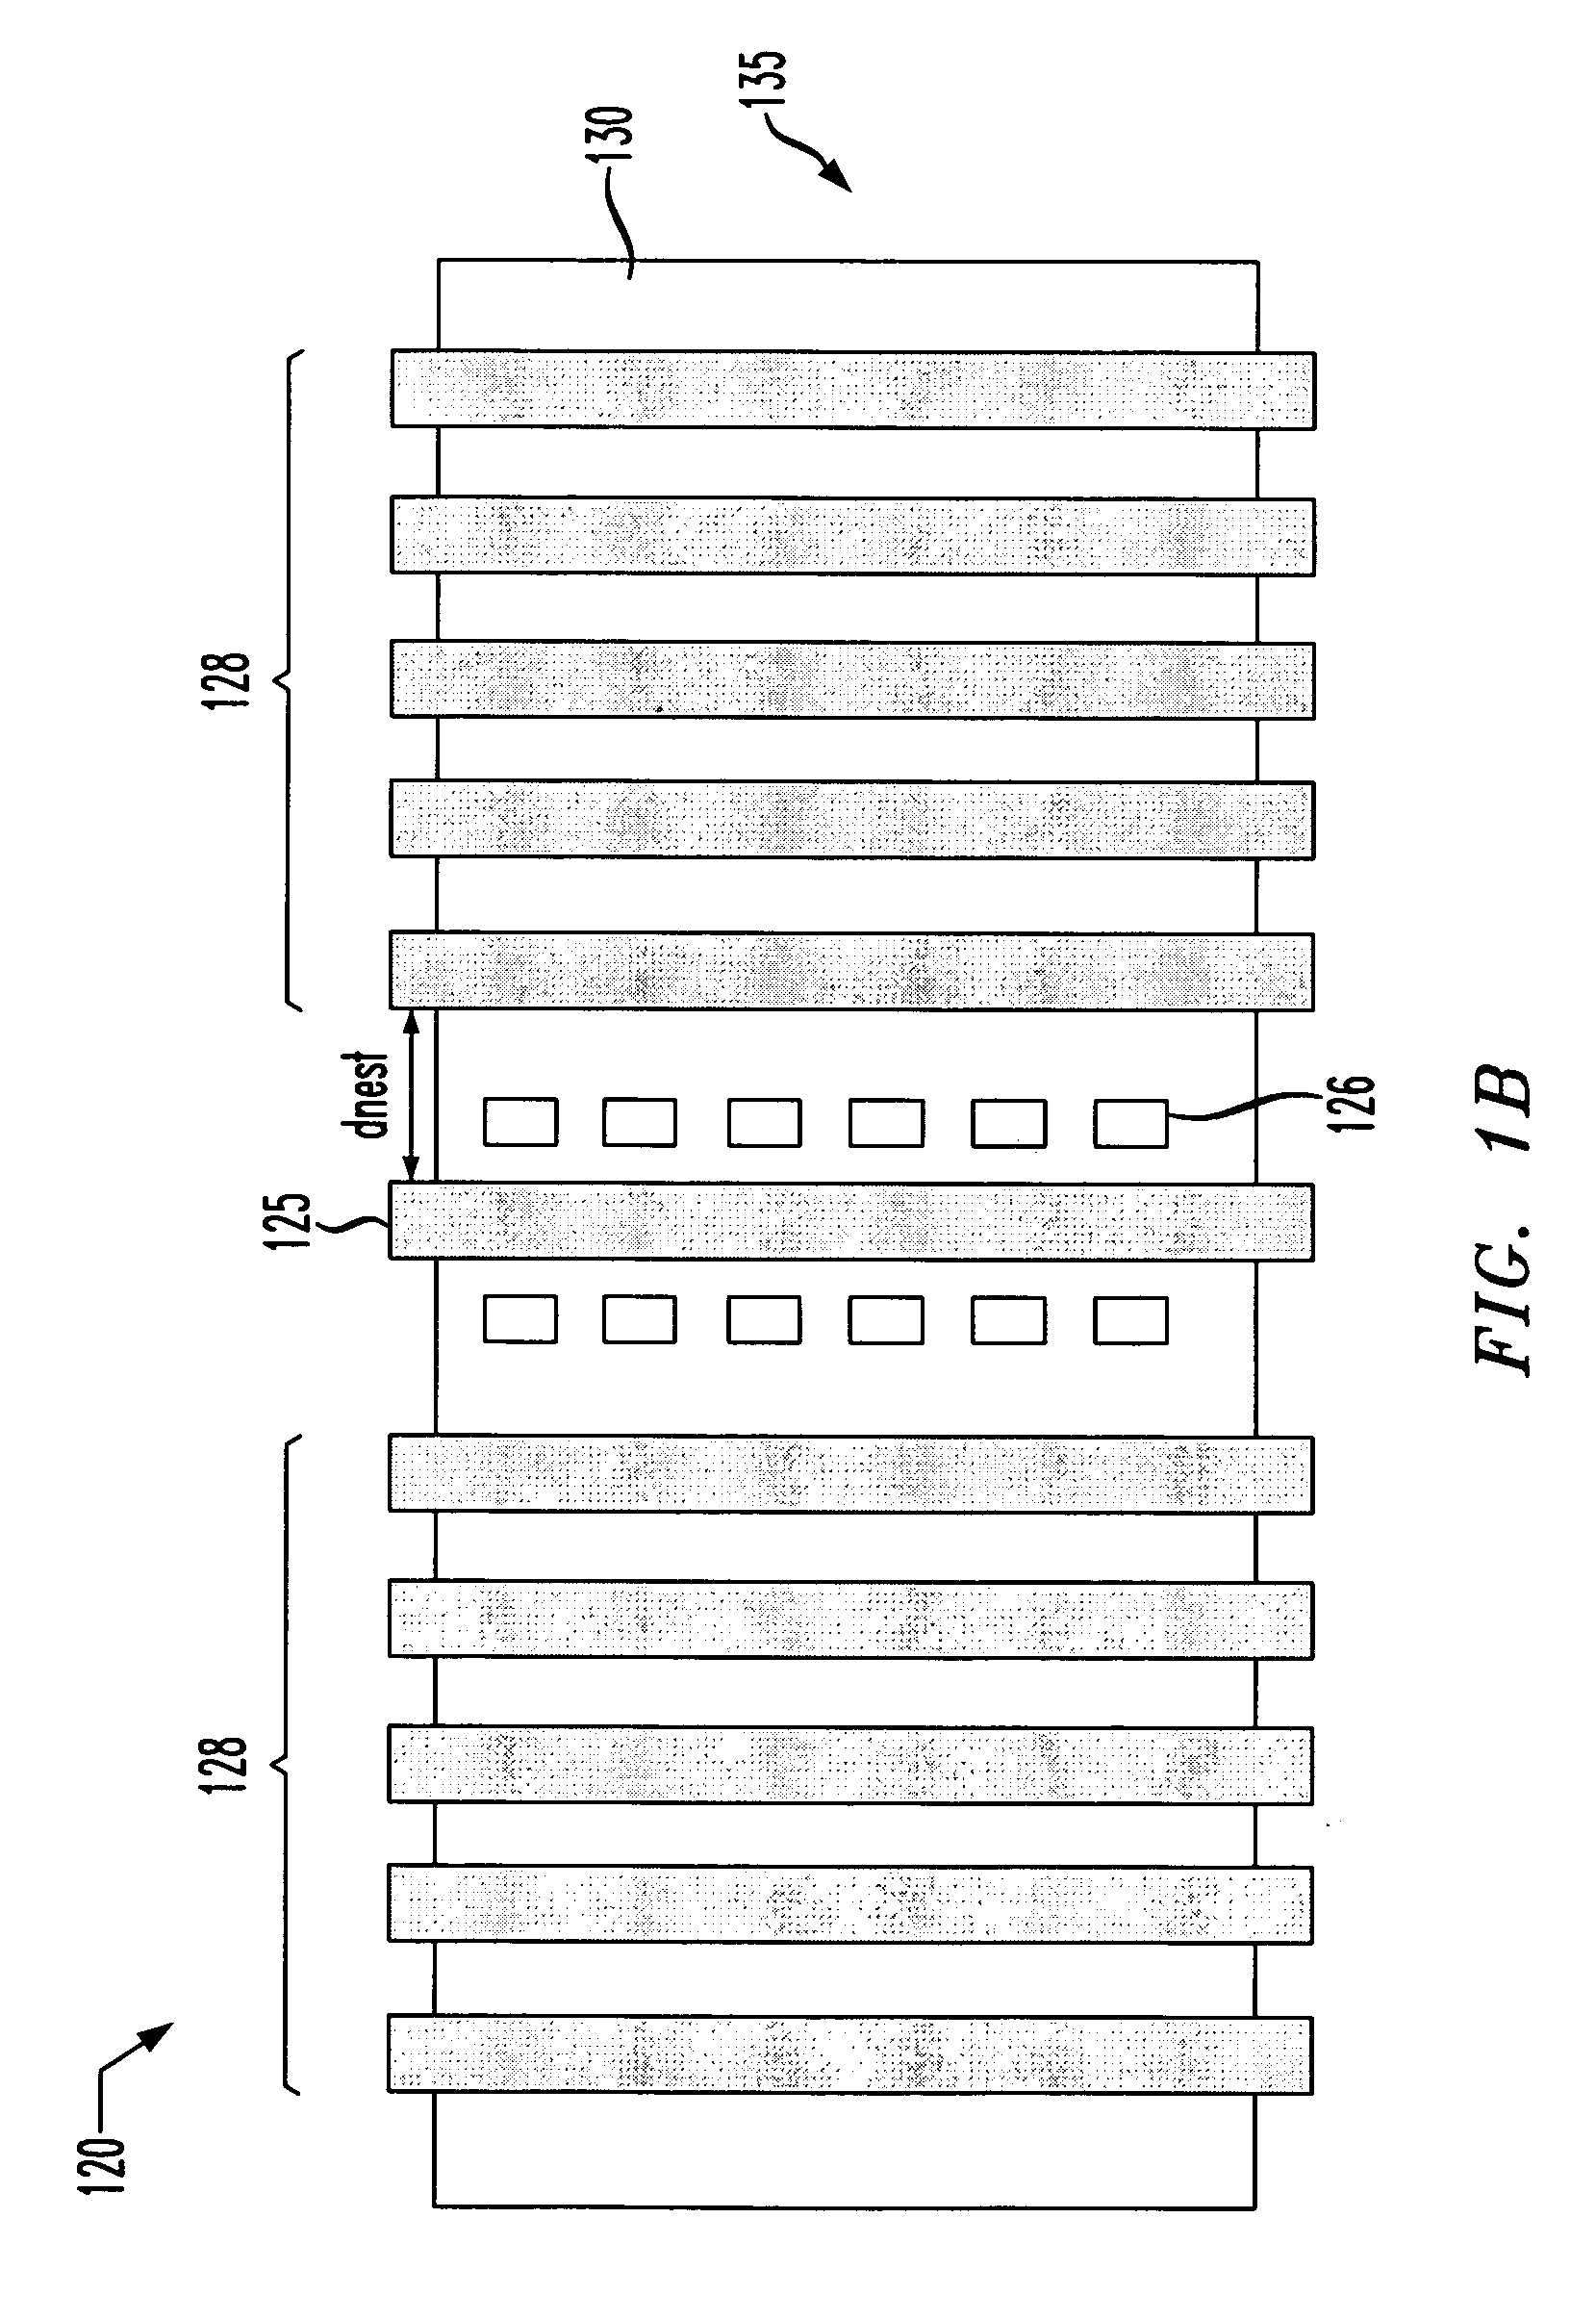 Method of making a semiconductor device by balancing shallow trench isolation stress and optical proximity effects